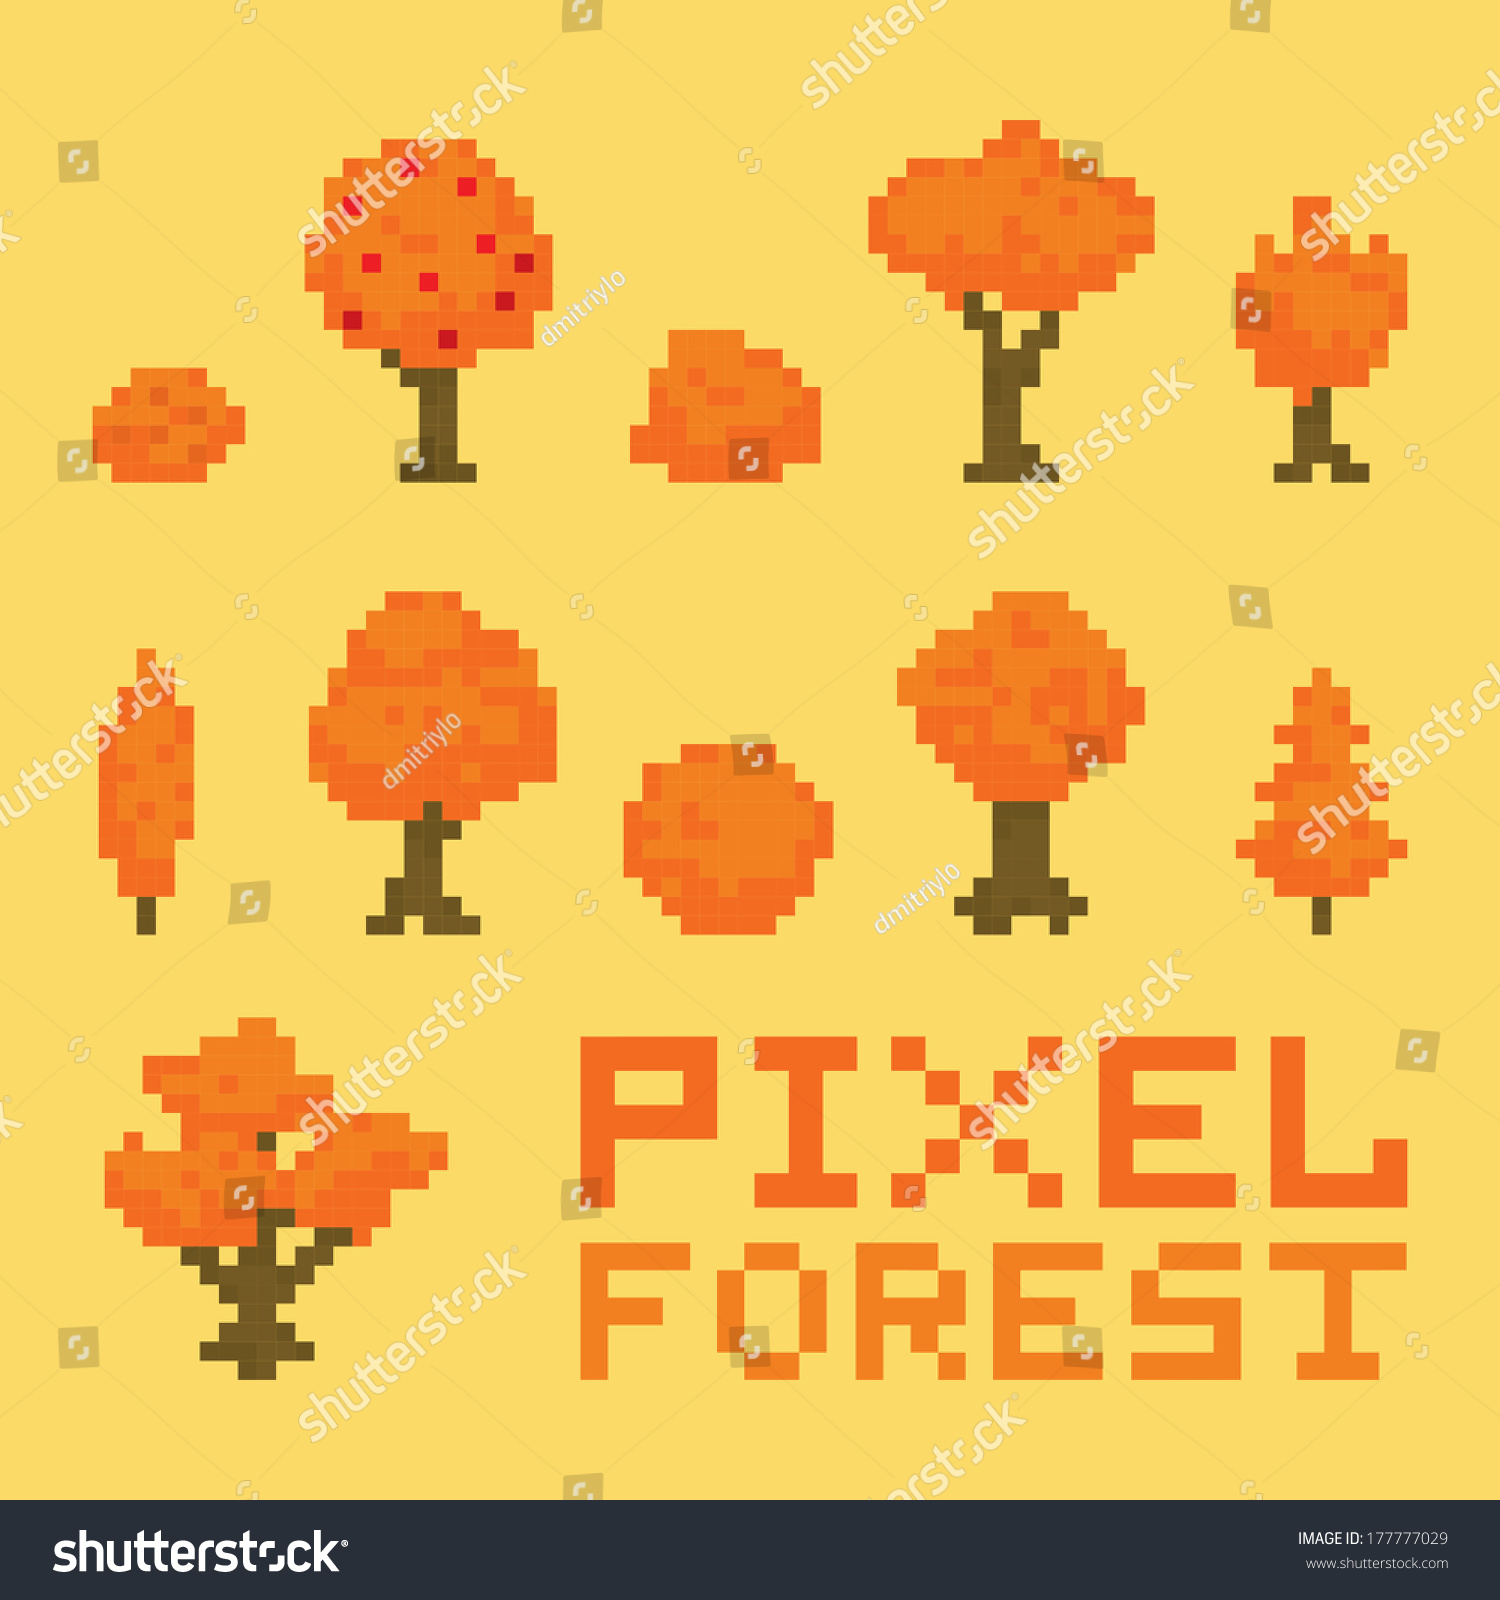 Pixel Art Autumn Forest Isolated Vector Stock Vector Royalty Free